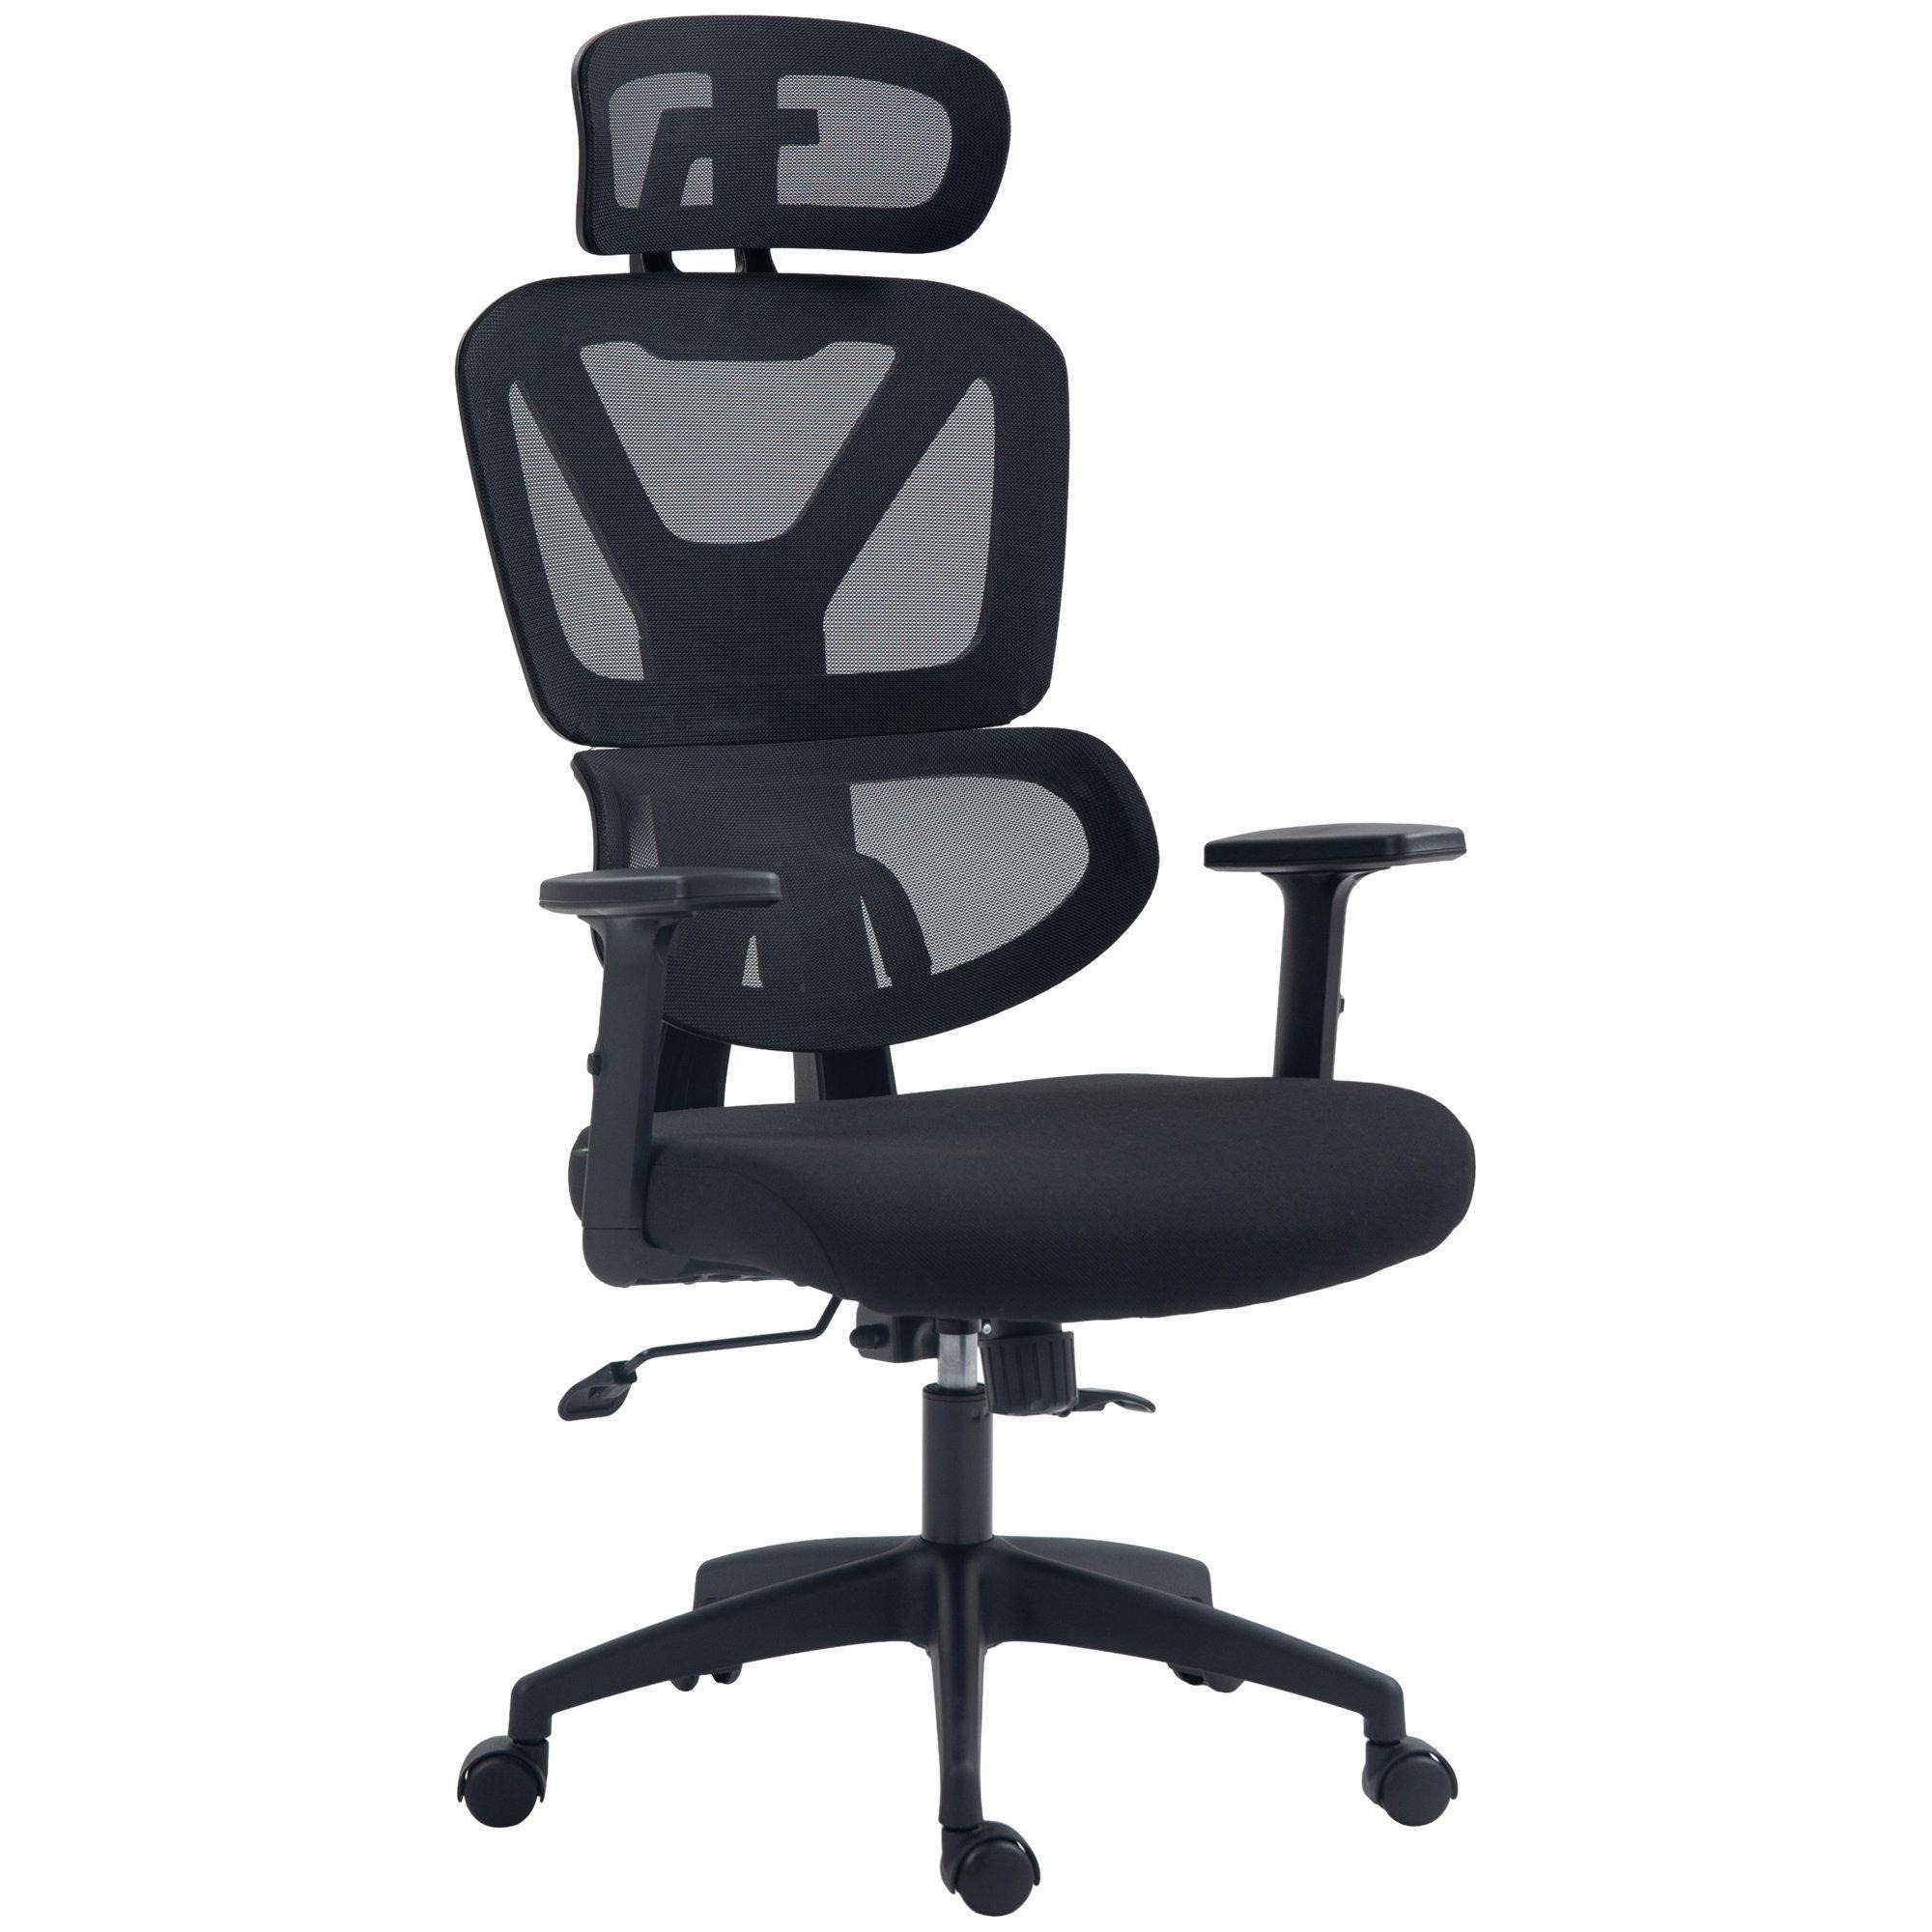 Mesh Office Chair Swivel Desk Chair with Adjustable Height - image 1